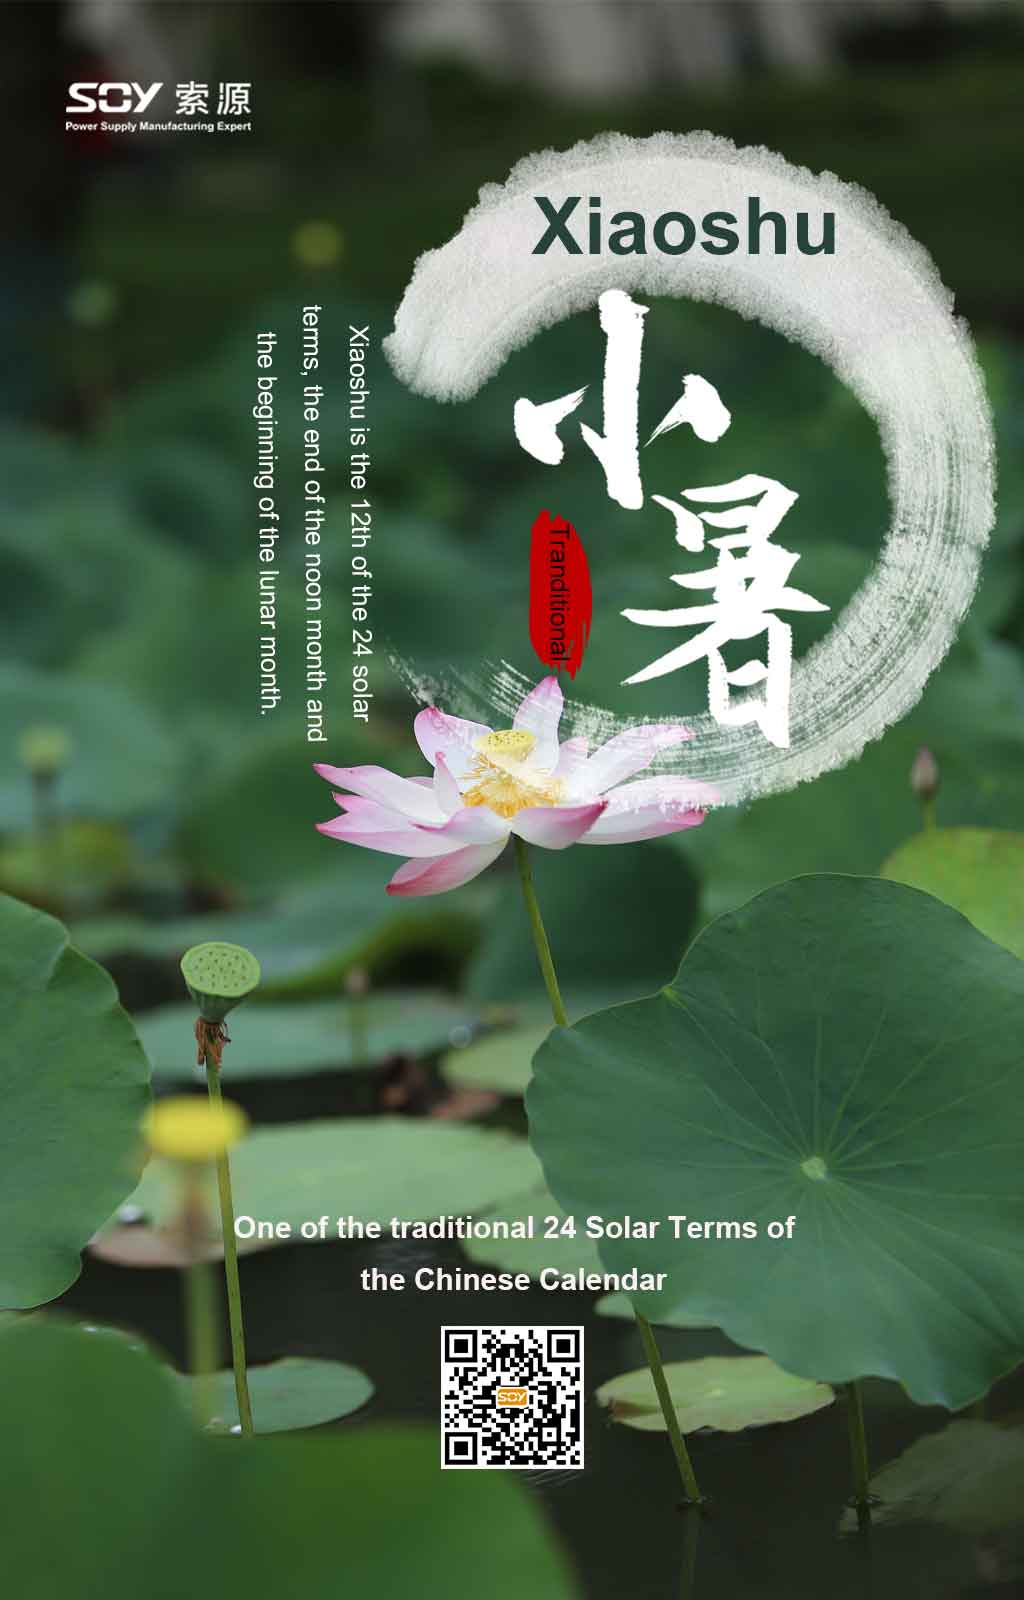 One of Chinese traditional solar terms Xiaoshu solar term